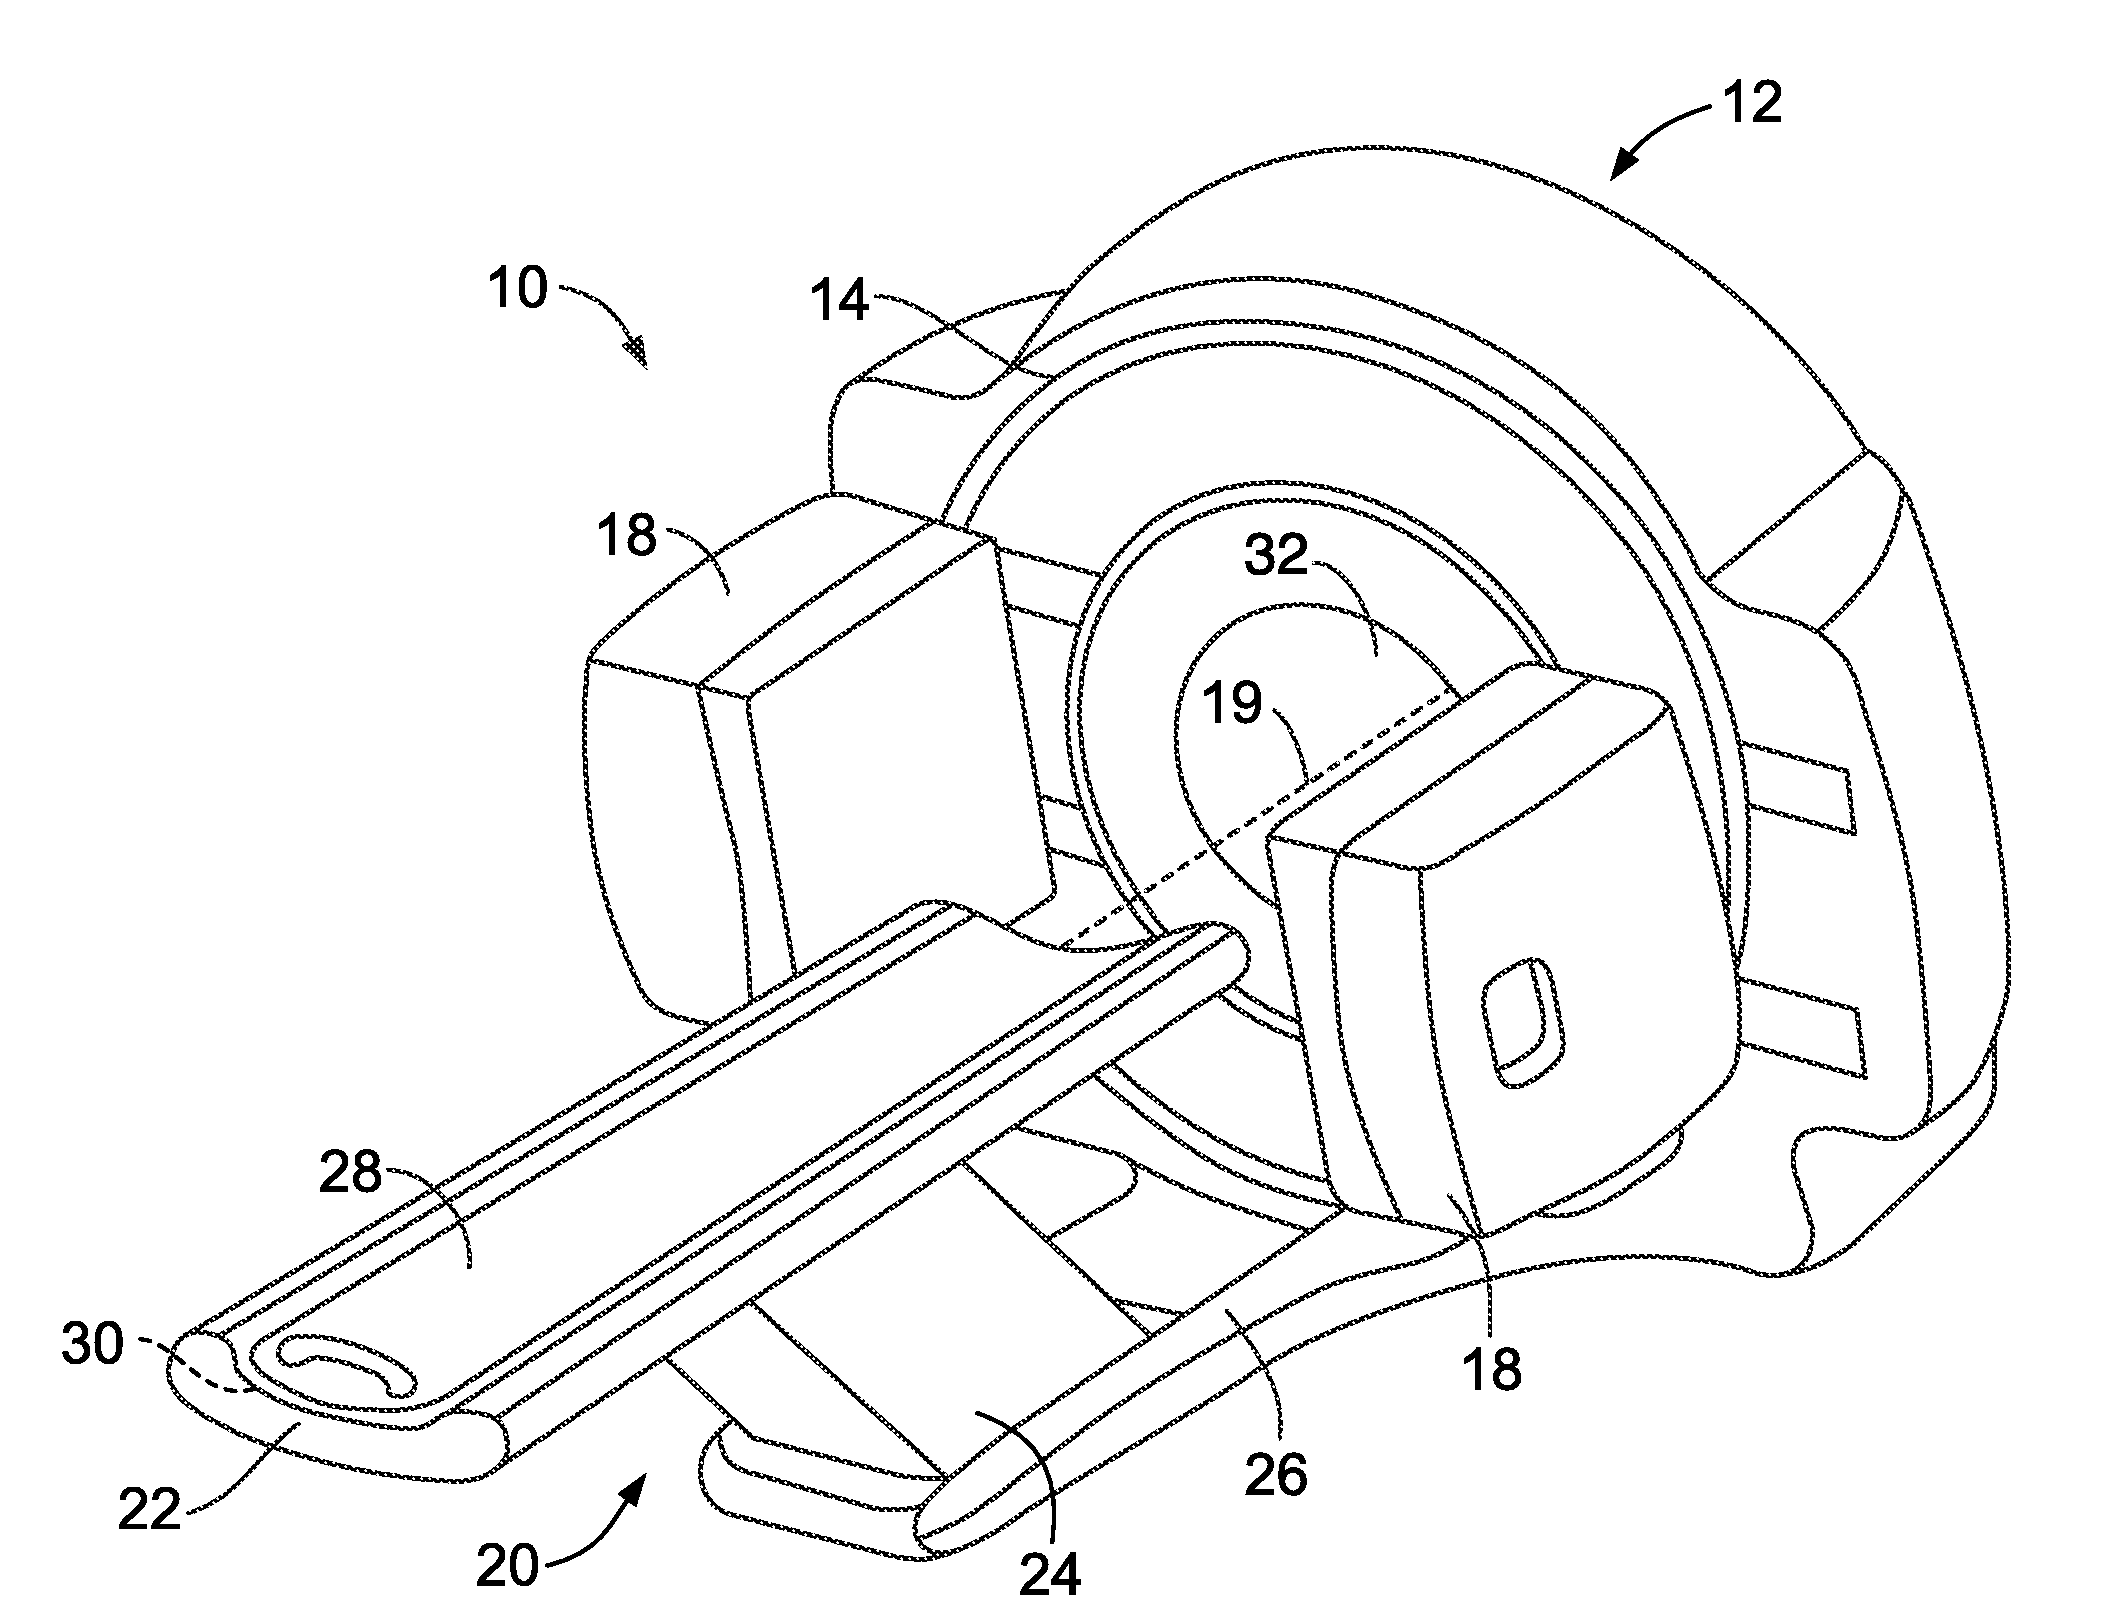 Apparatus and methods for determining a system matrix for pinhole collimator imaging systems